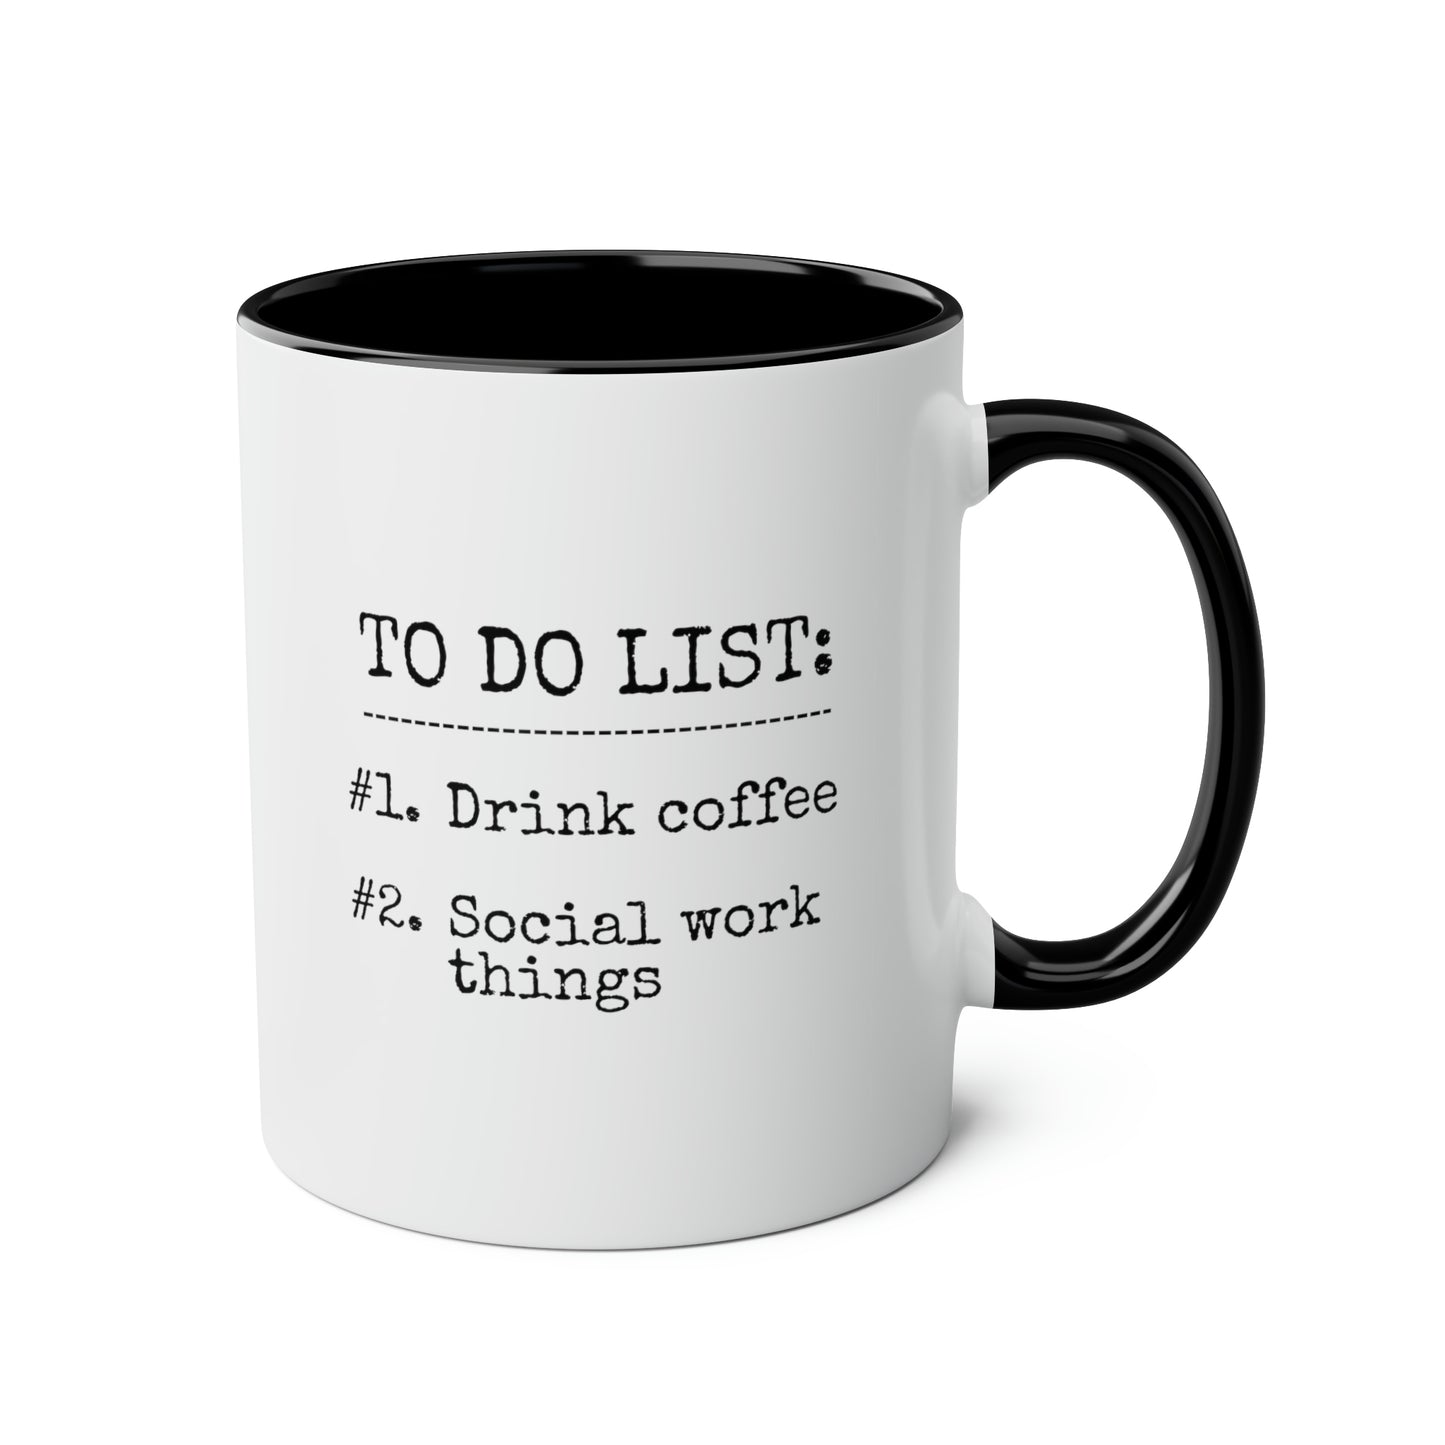 To Do List Drink Coffee Social Work Things 11oz white with black accent funny large coffee mug gift for social worker graduation first waveywares wavey wares wavywares wavy wares